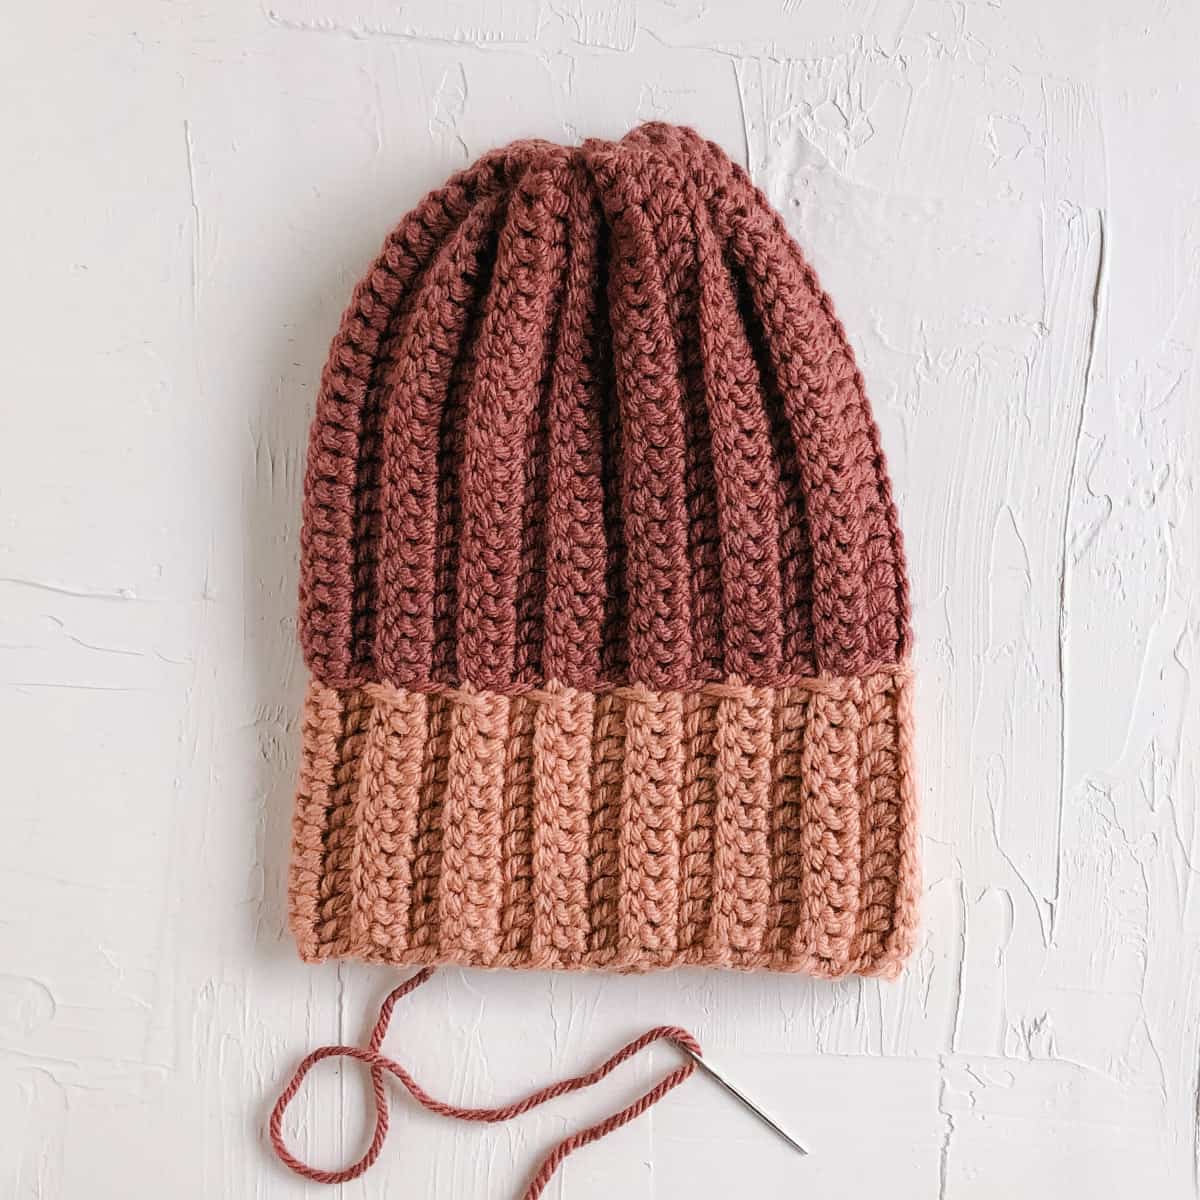 A ribbed pink crochet hat in progress. The top is cinched closed to create the top of the beanie.